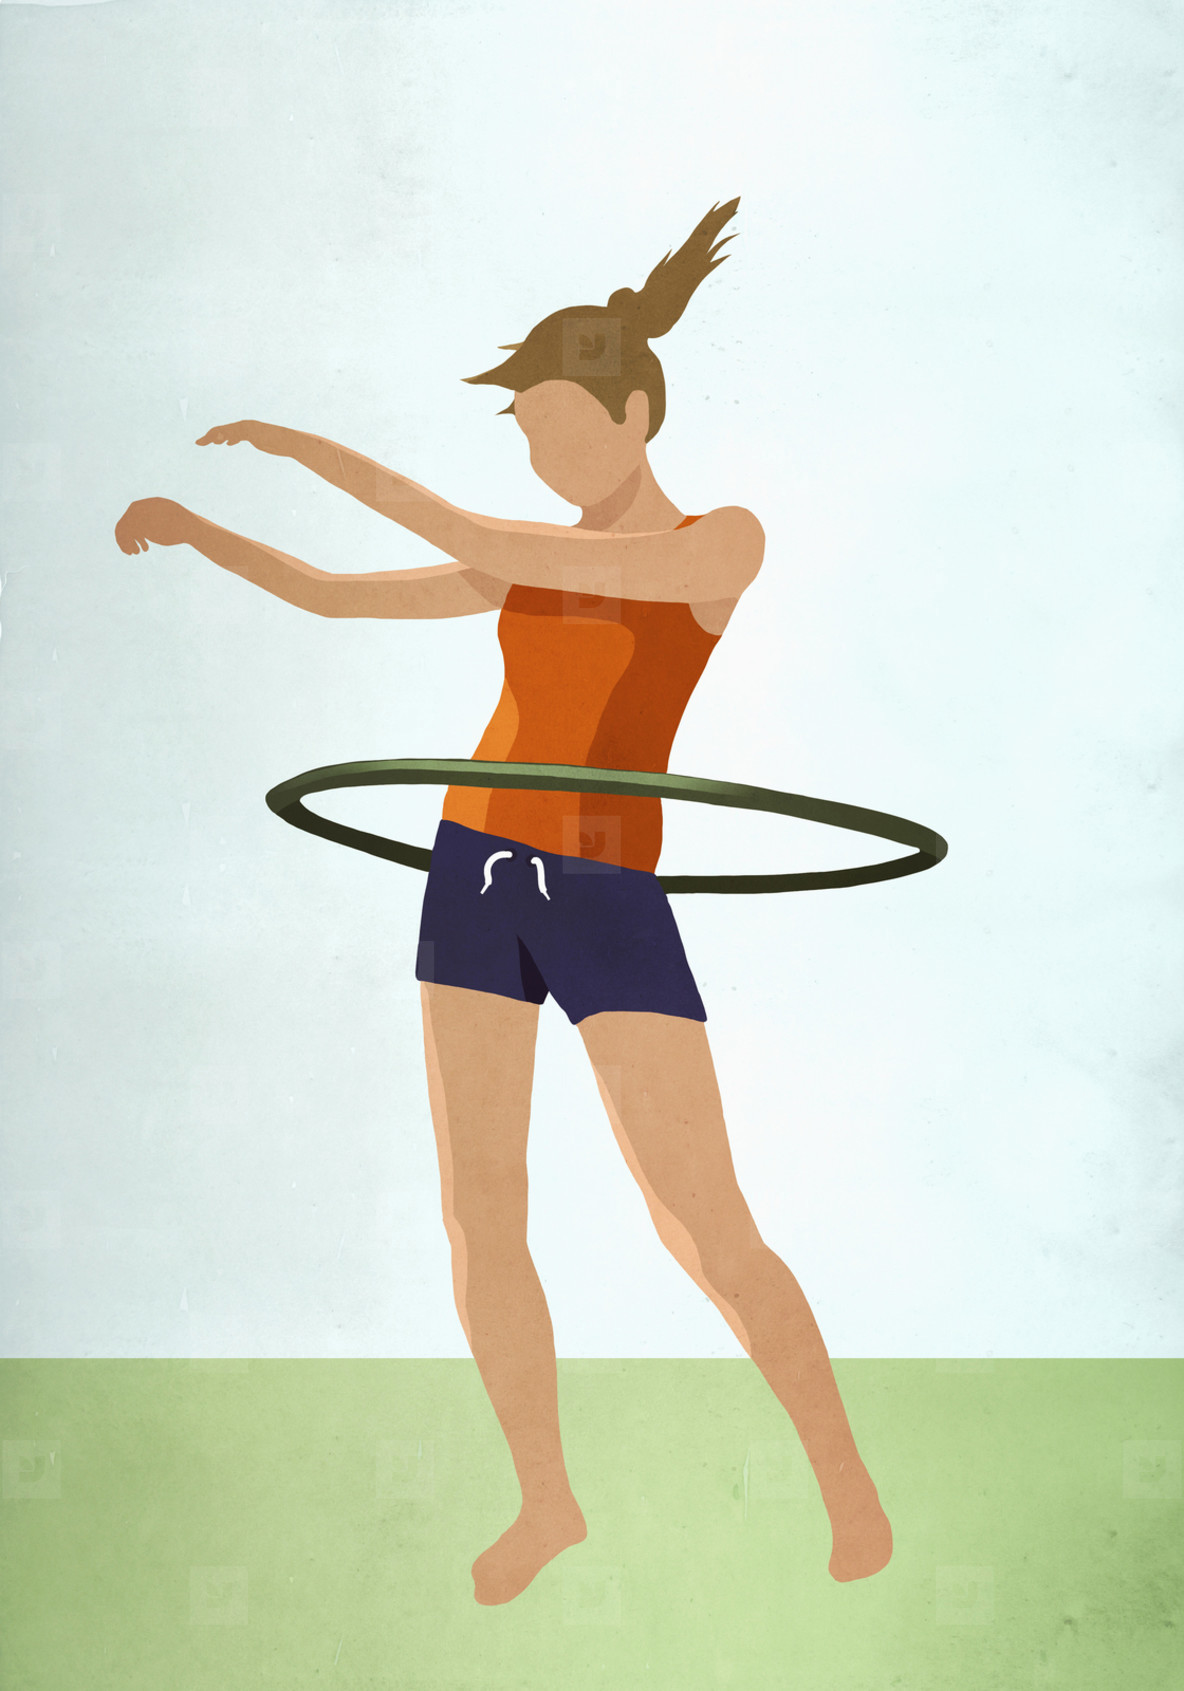 Woman with hula hoop standing on field. 